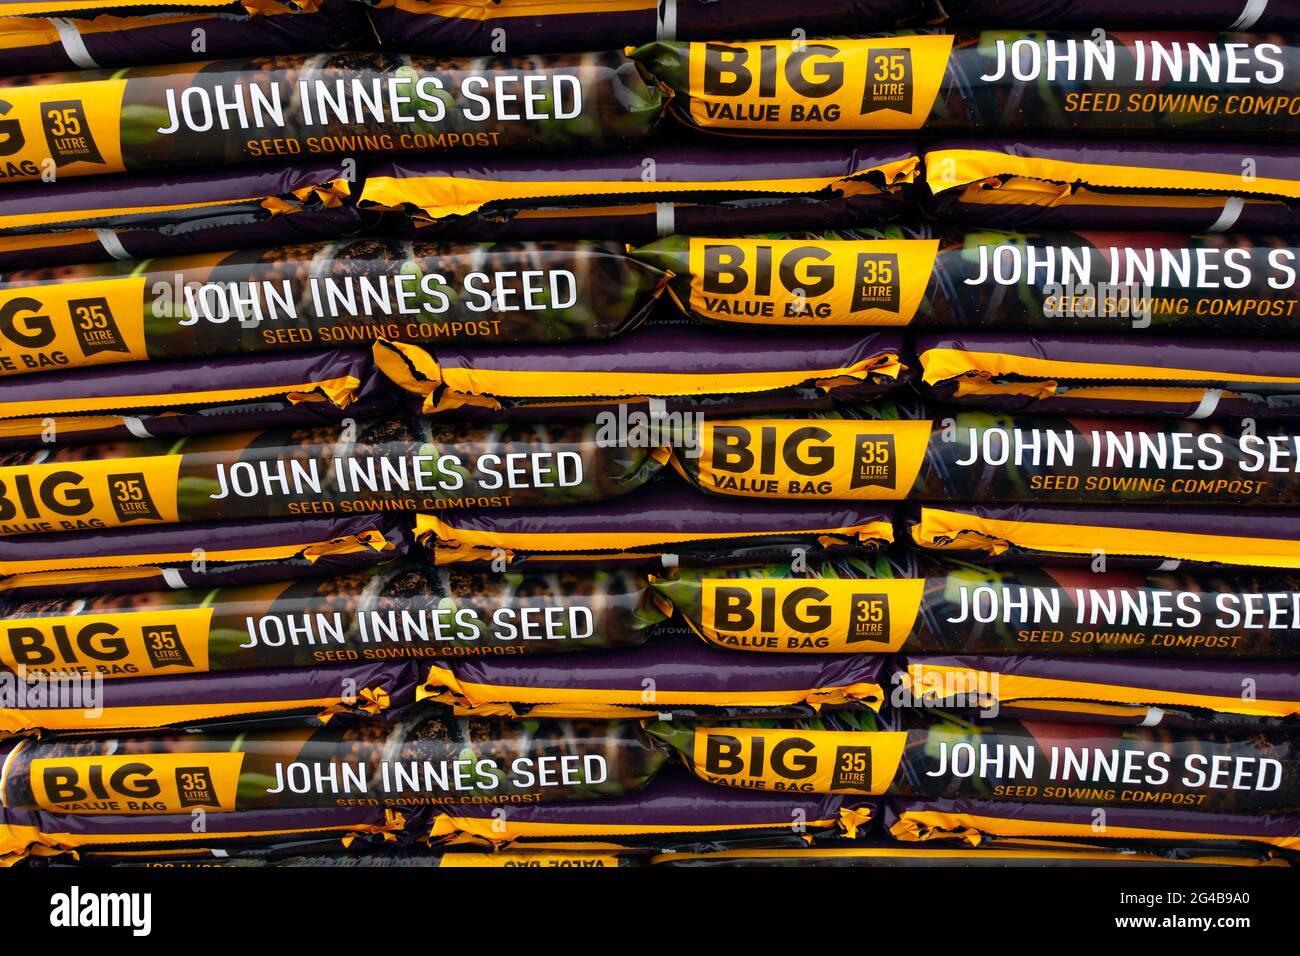 A stack of bags of John Innes seed sowing compost for sale in a farm shop  Stock Photo - Alamy